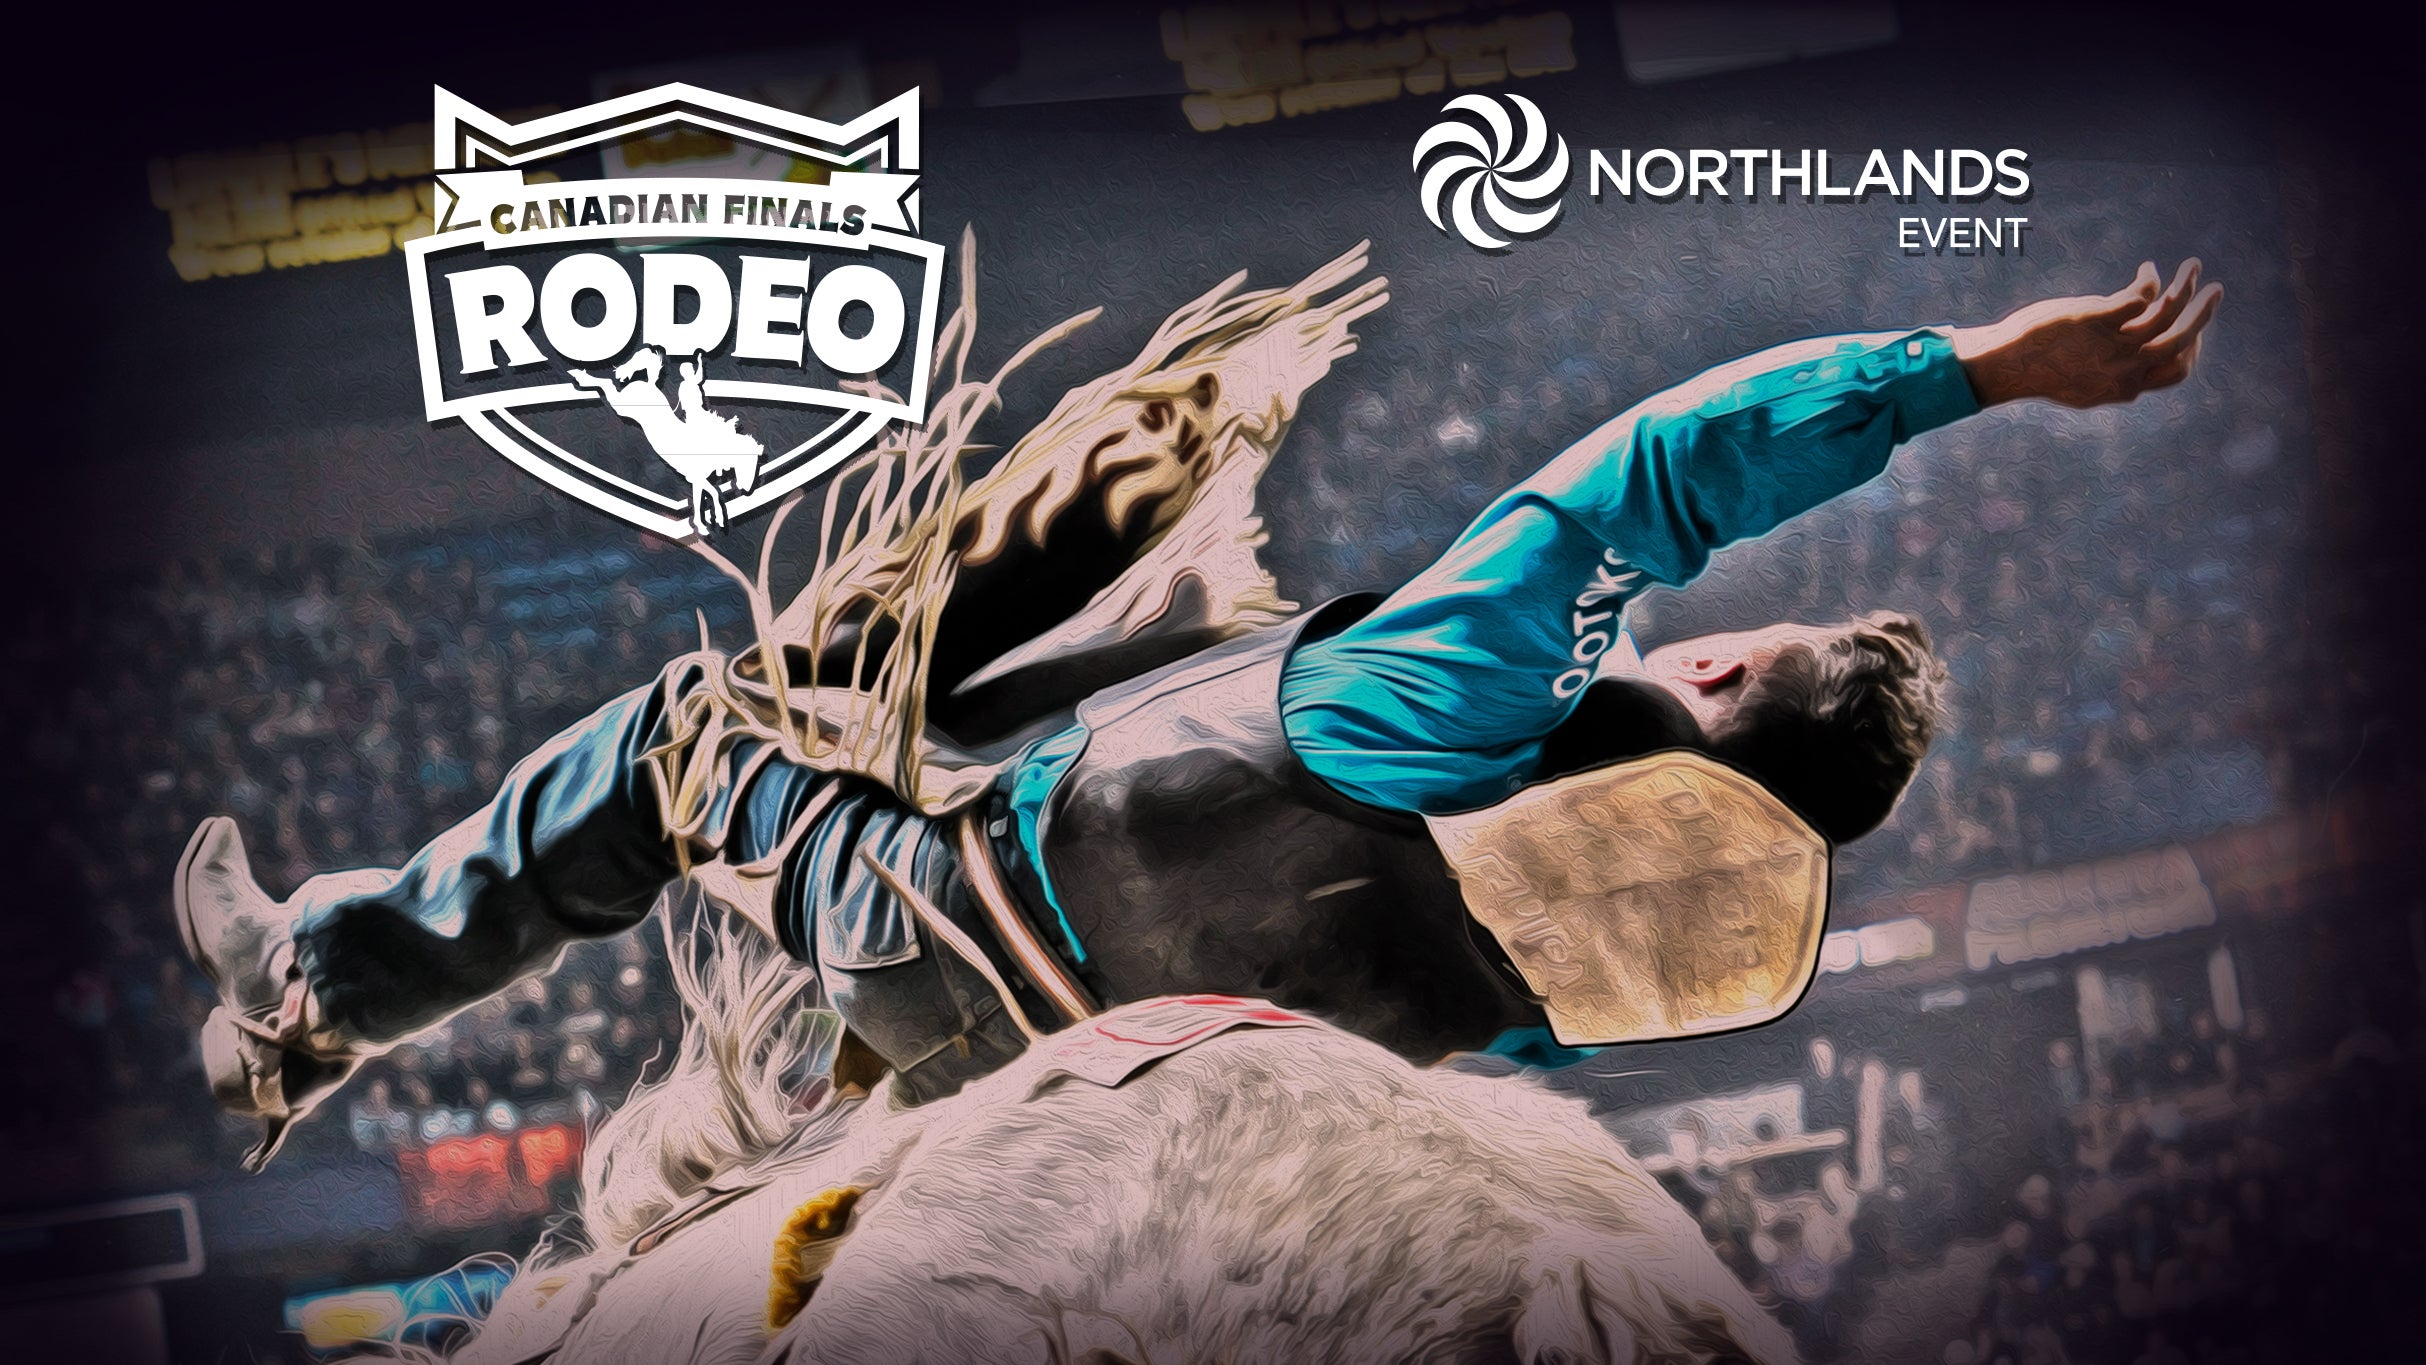 Canadian Finals Rodeo presale password for approved tickets in Edmonton